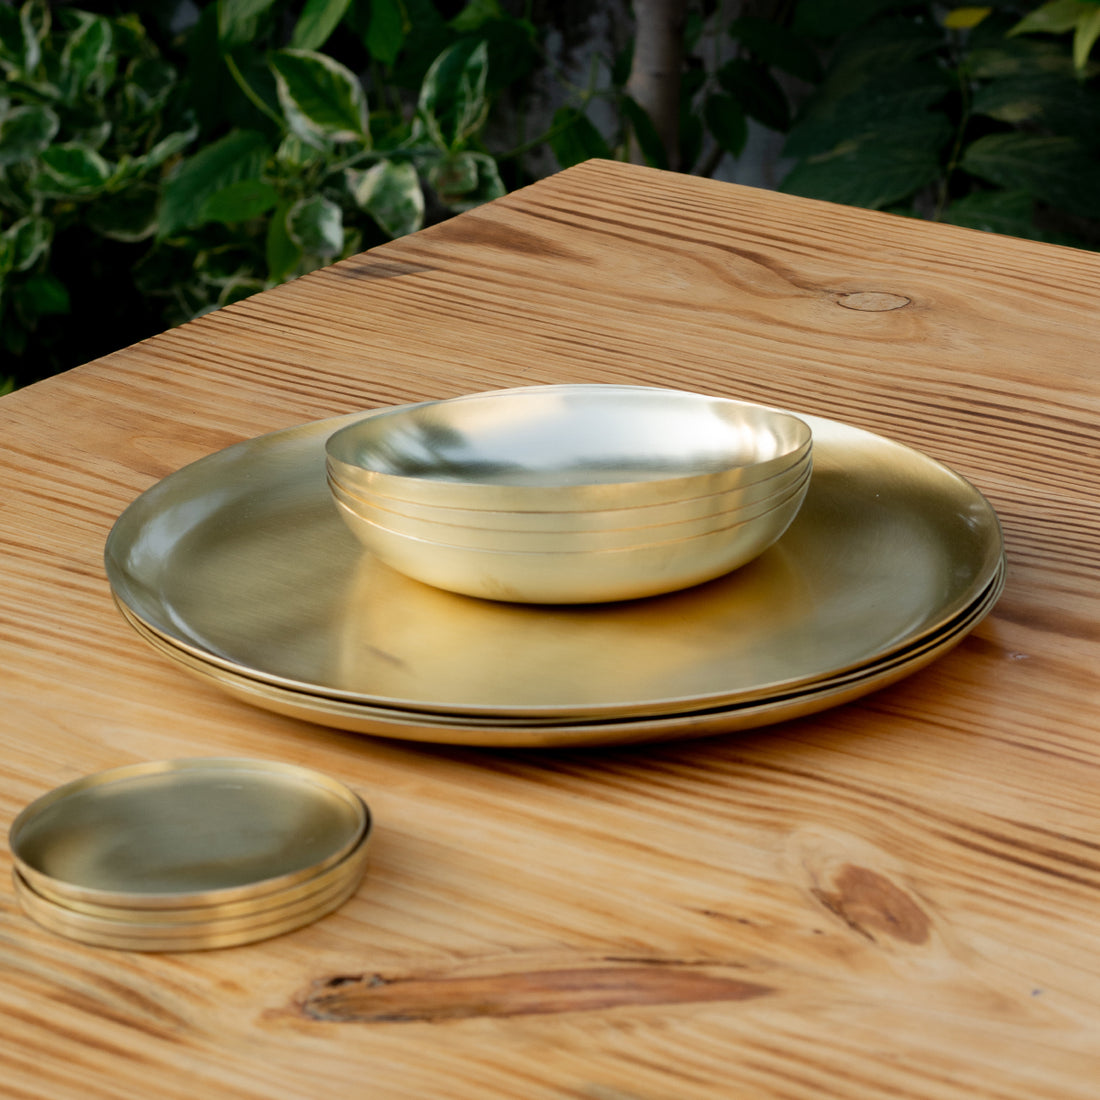 Heirloom Brass Plate with pasta bowls and coasters